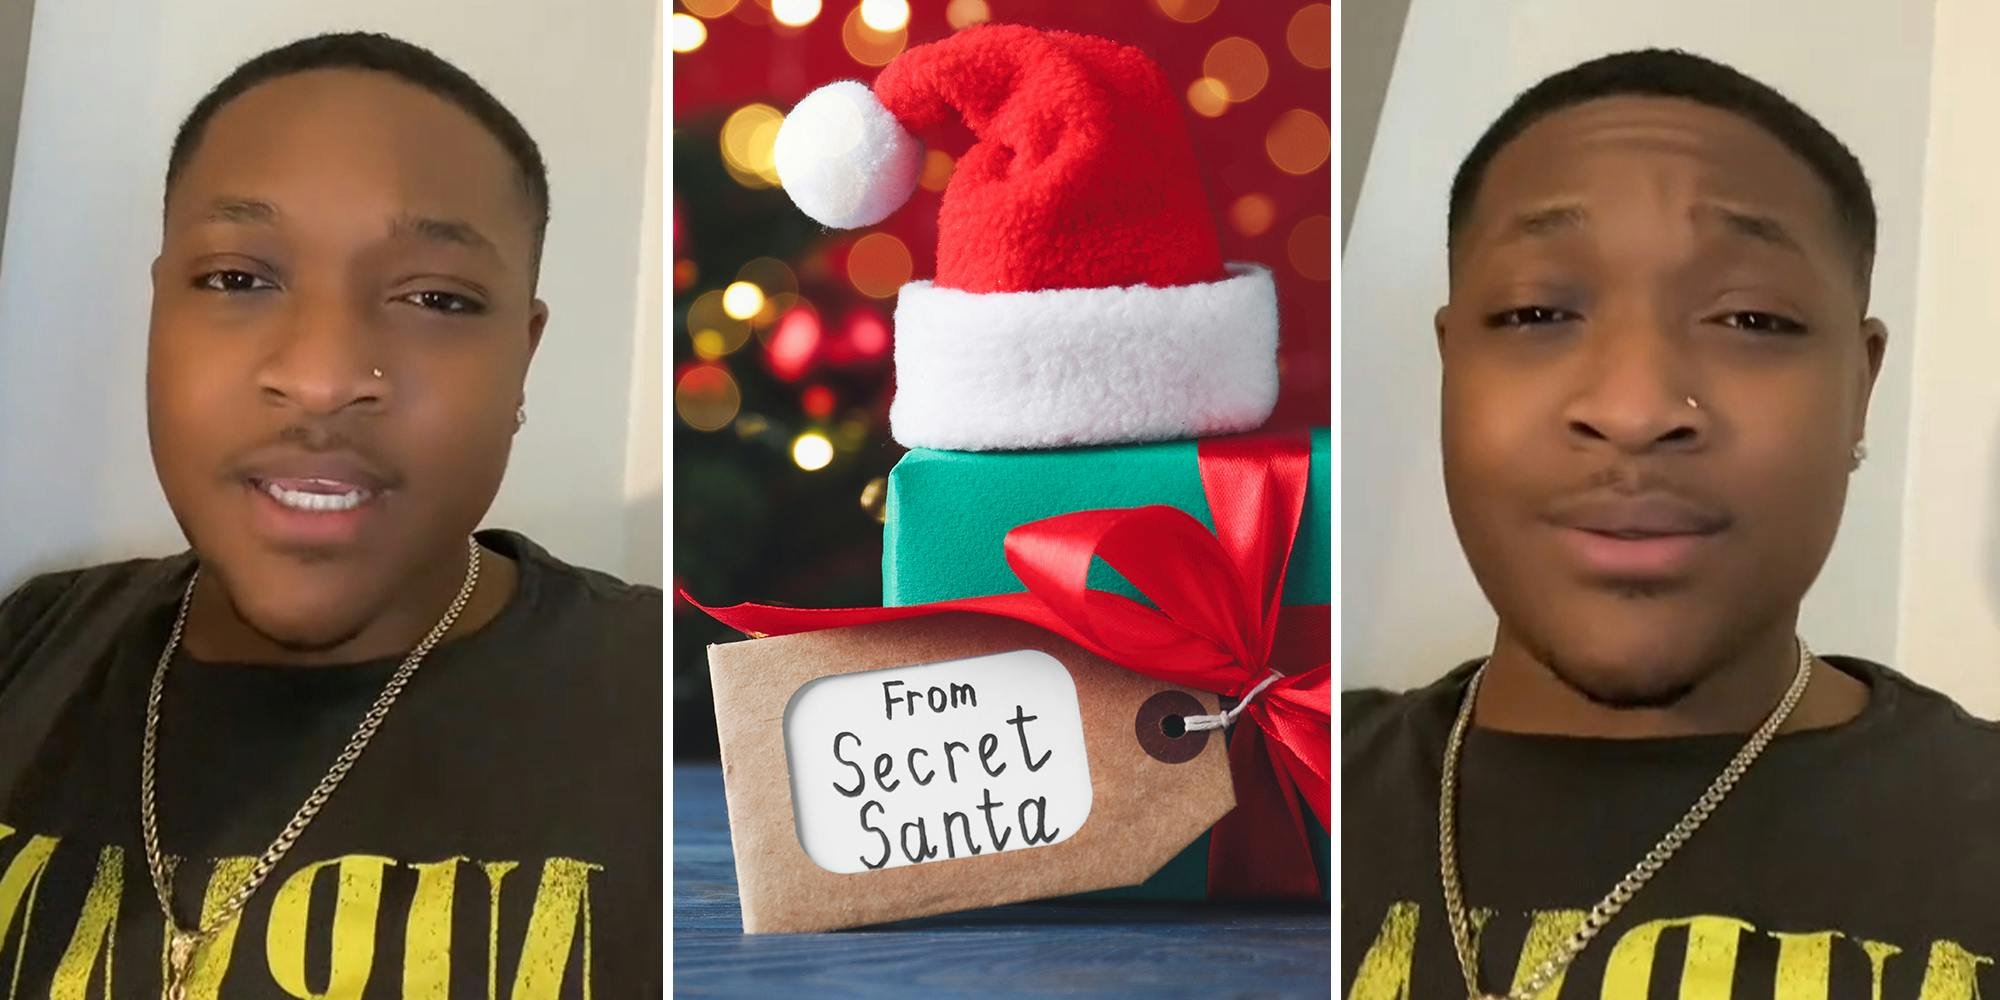 Office worker gets fired over his Secret Santa. Here's why